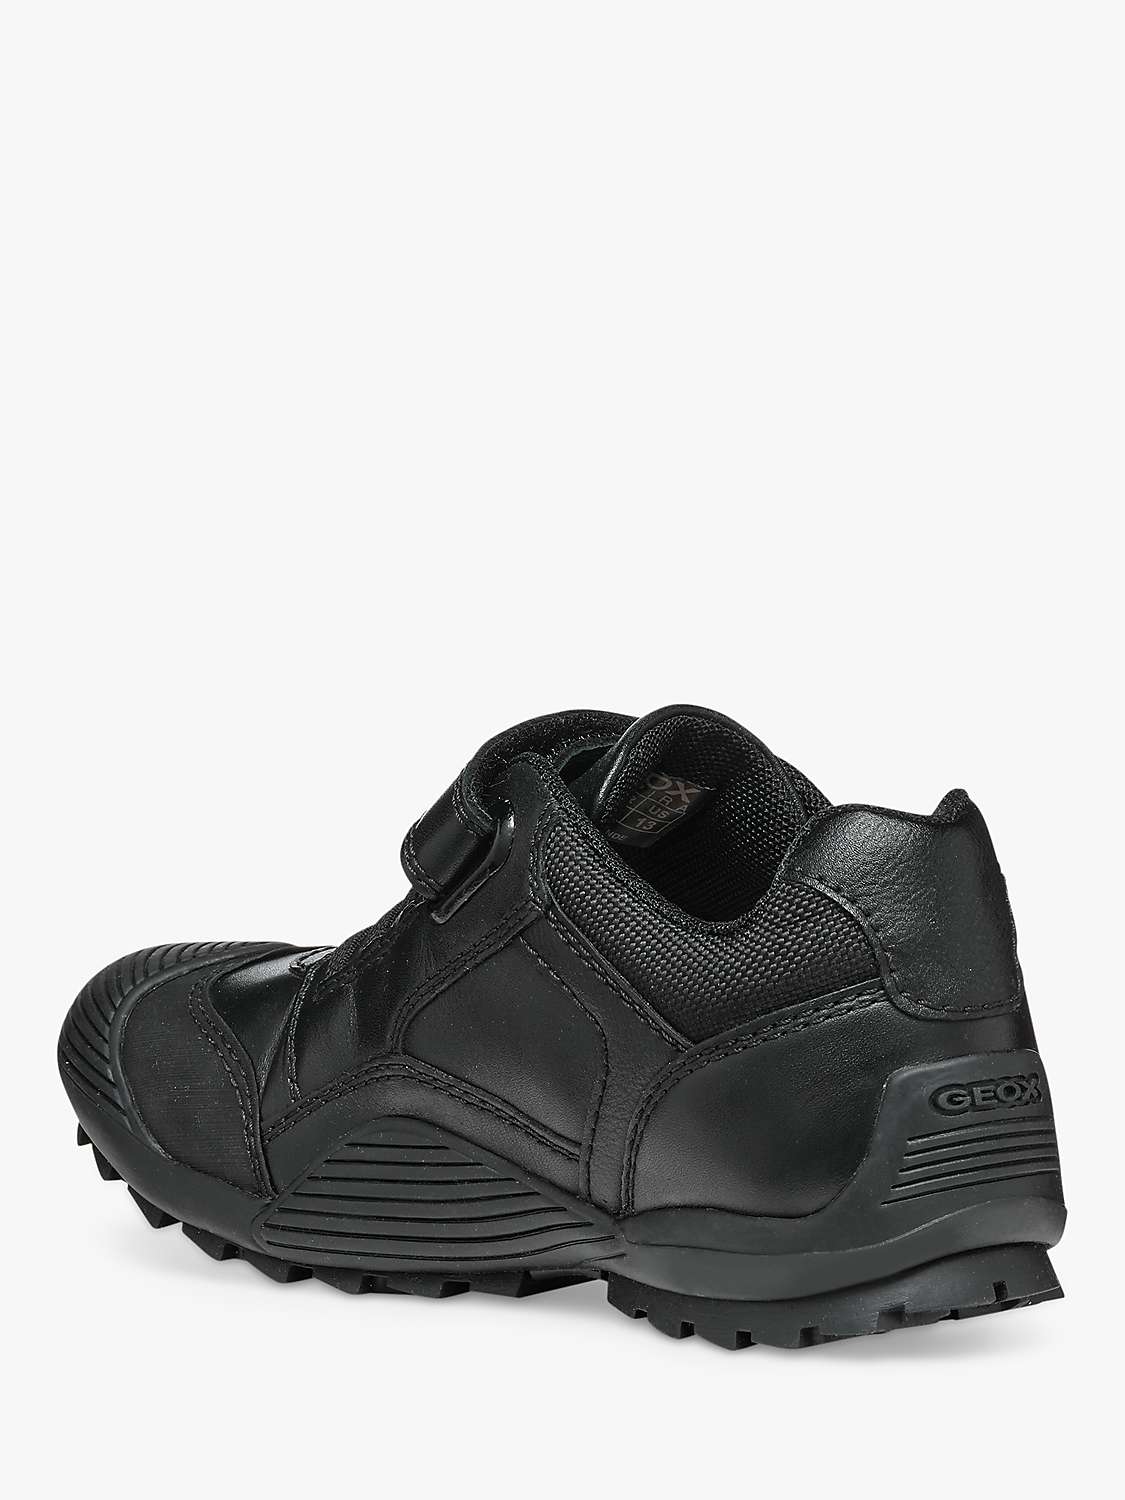 Geox Kids' Savage Wide Fit Shoes at John Lewis & Partners